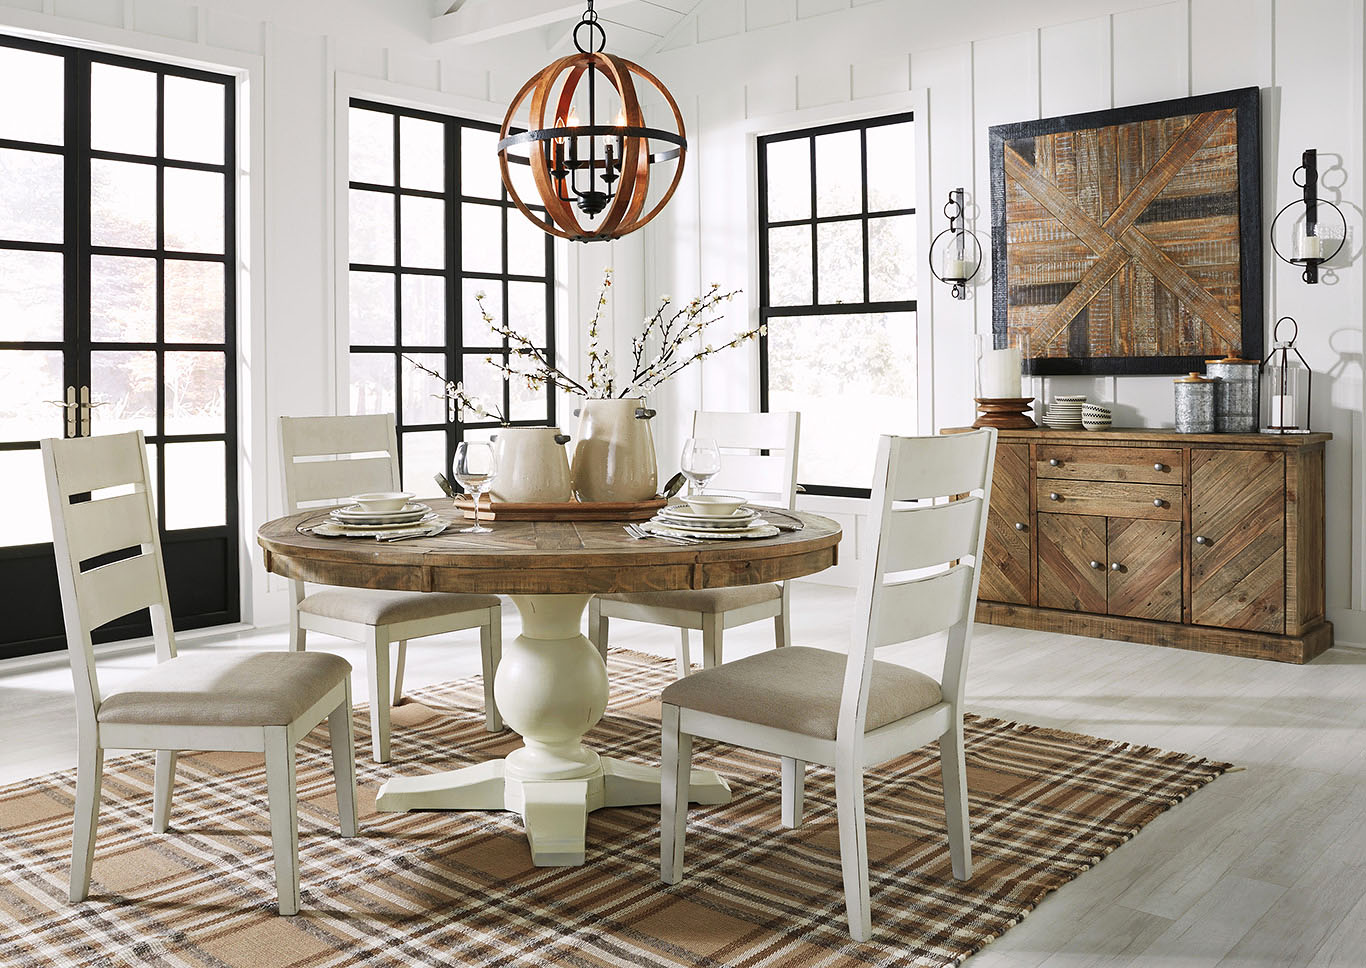 Grindleburg Round Dining Table W 4, White Round Dining Table 4 Chairs